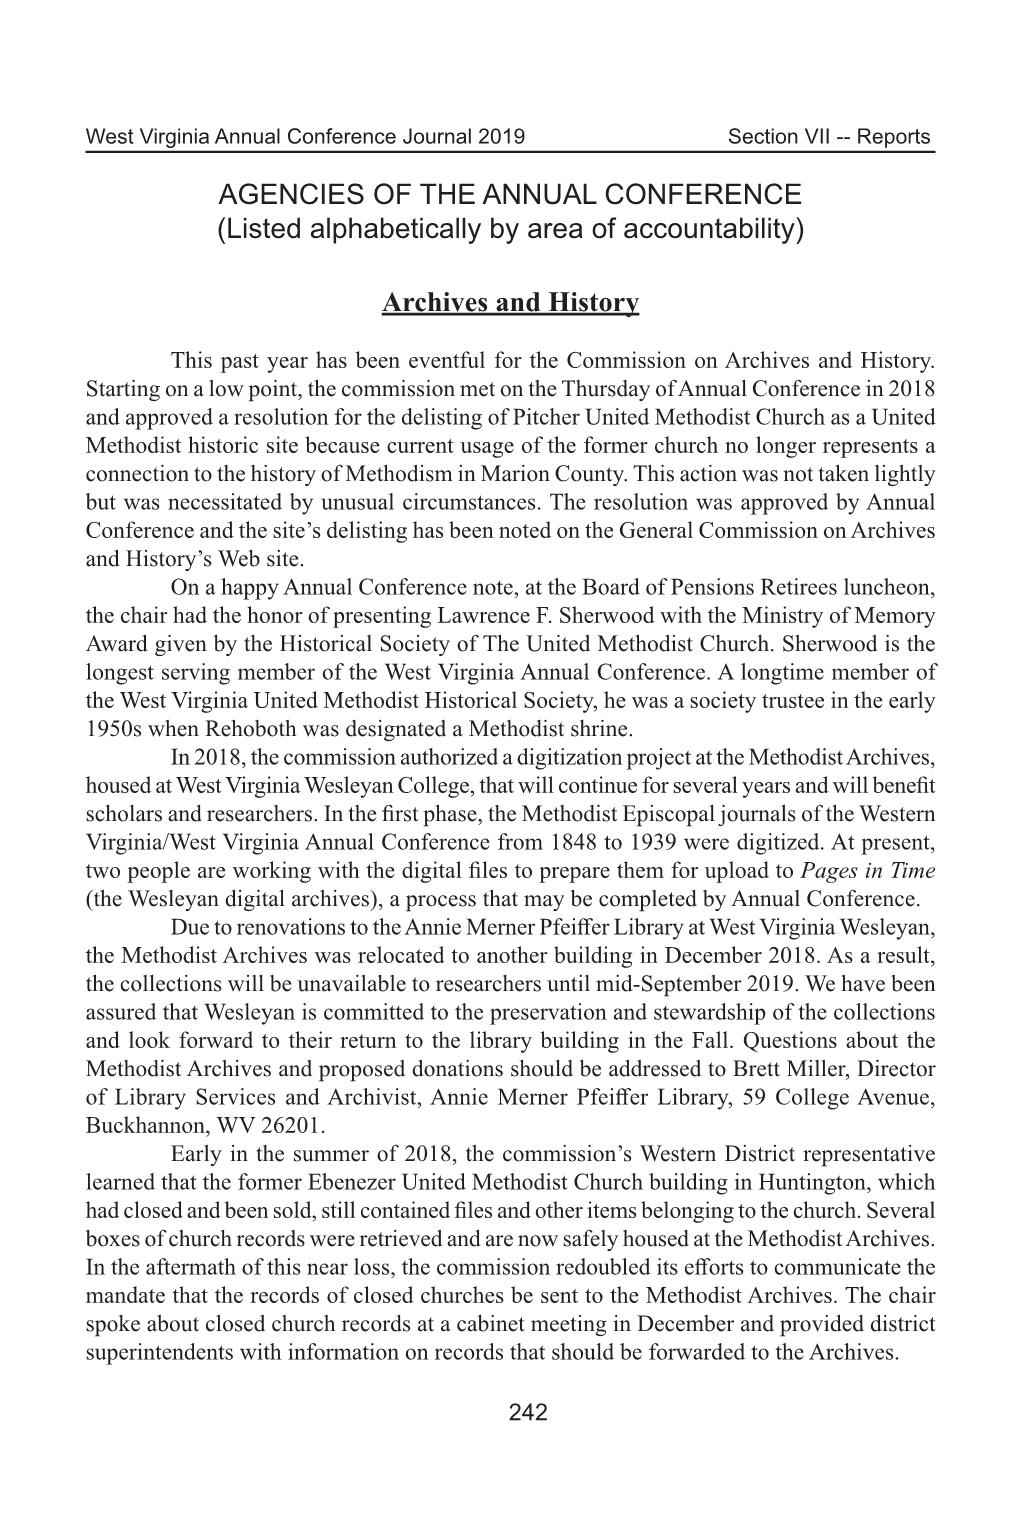 Archives and History AGENCIES of the ANNUAL CONFERENCE